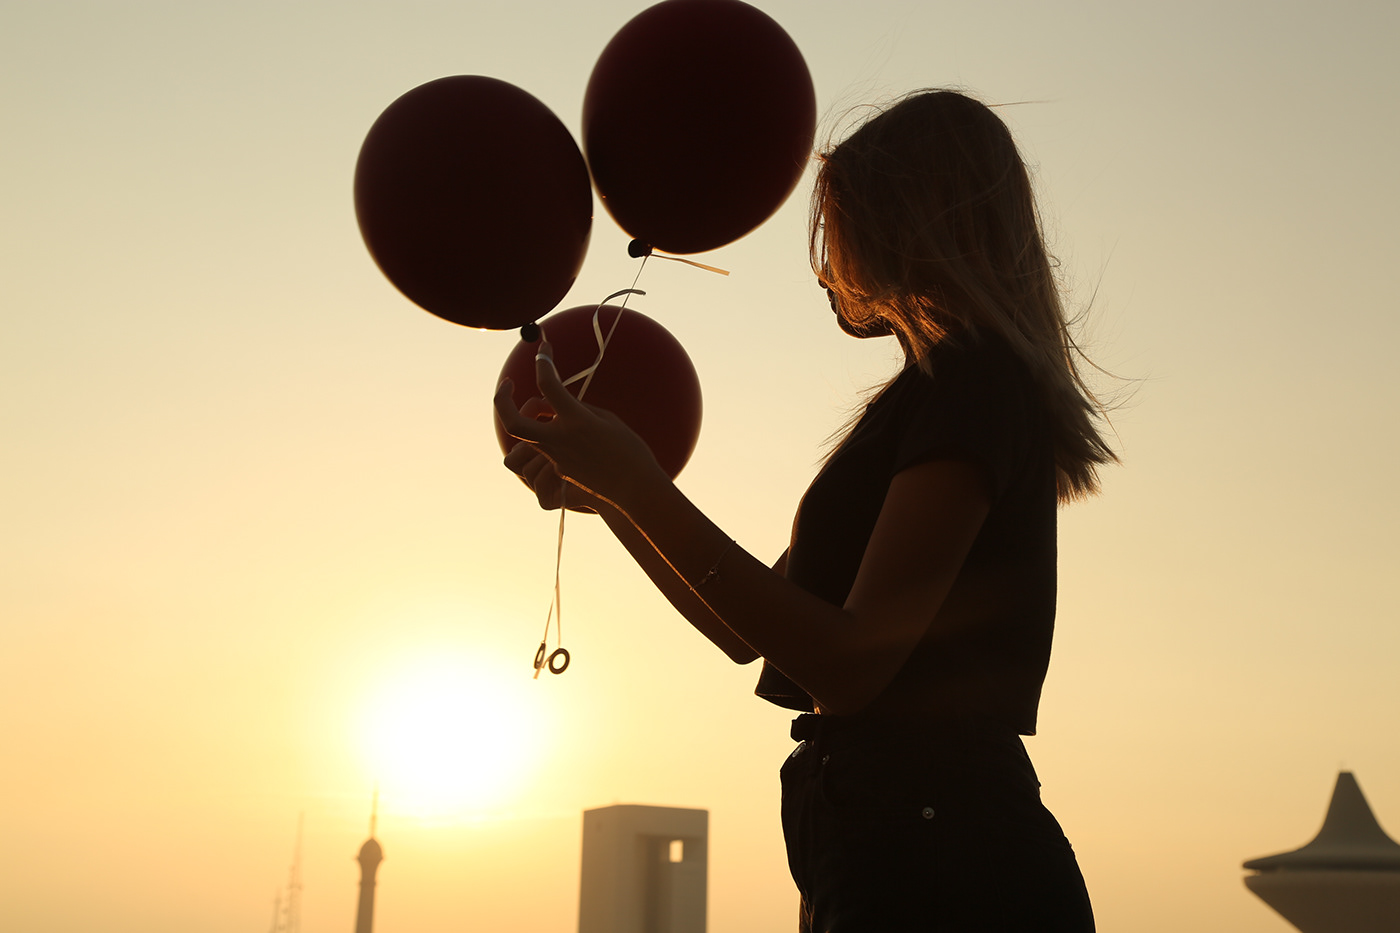 sillhouette balloons cute clouds Sunset Photography sunset photoshoot model